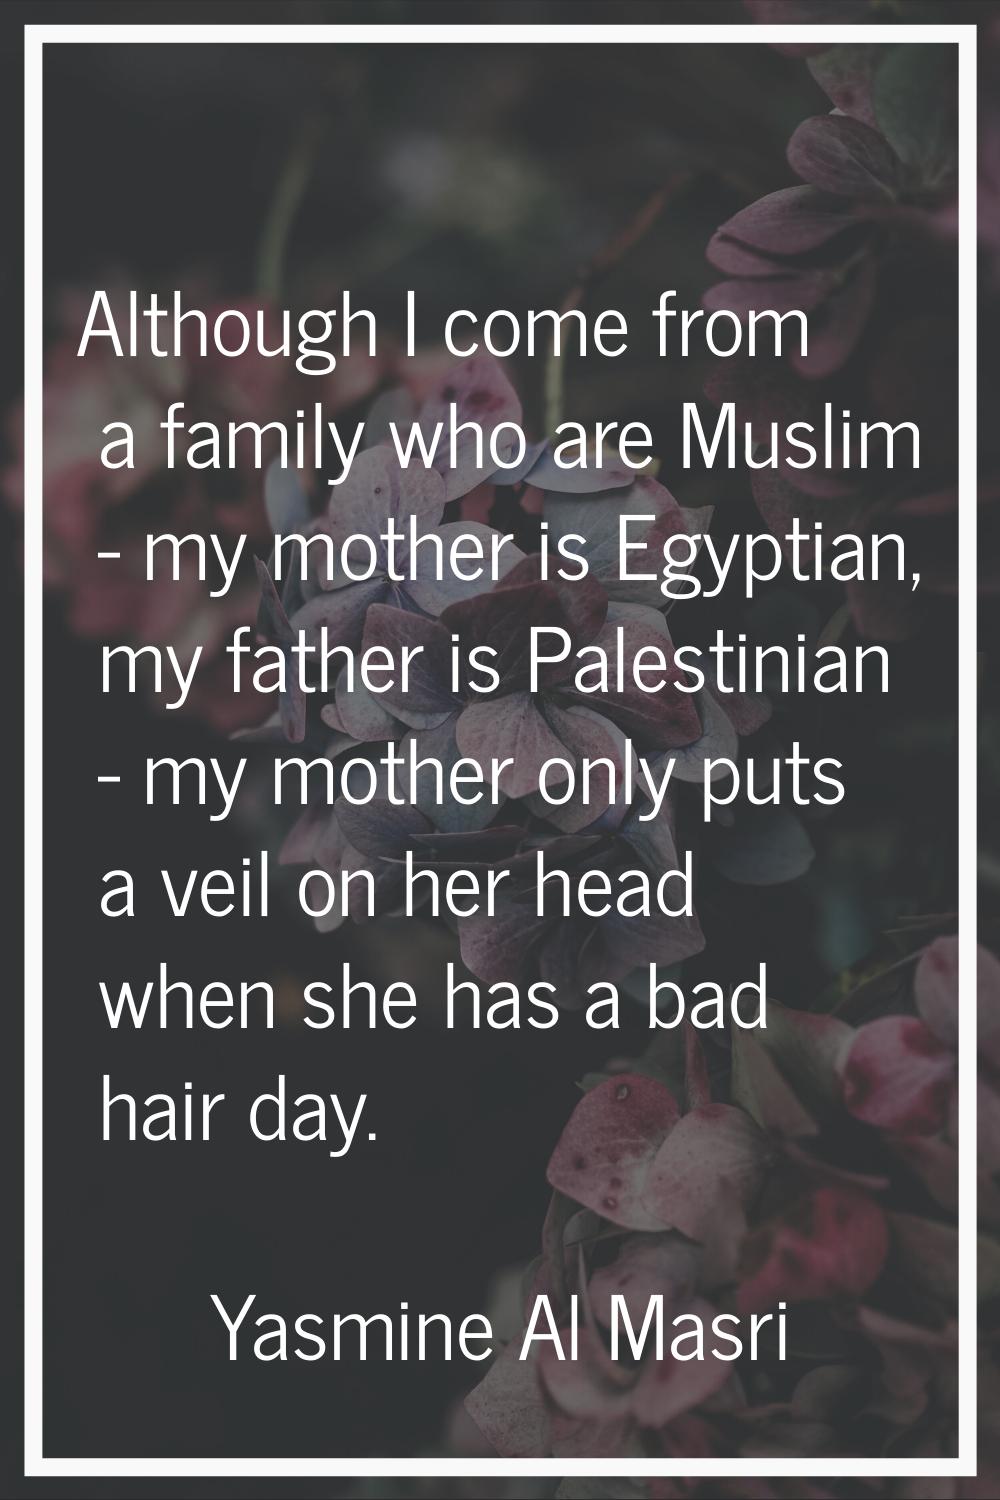 Although I come from a family who are Muslim - my mother is Egyptian, my father is Palestinian - my